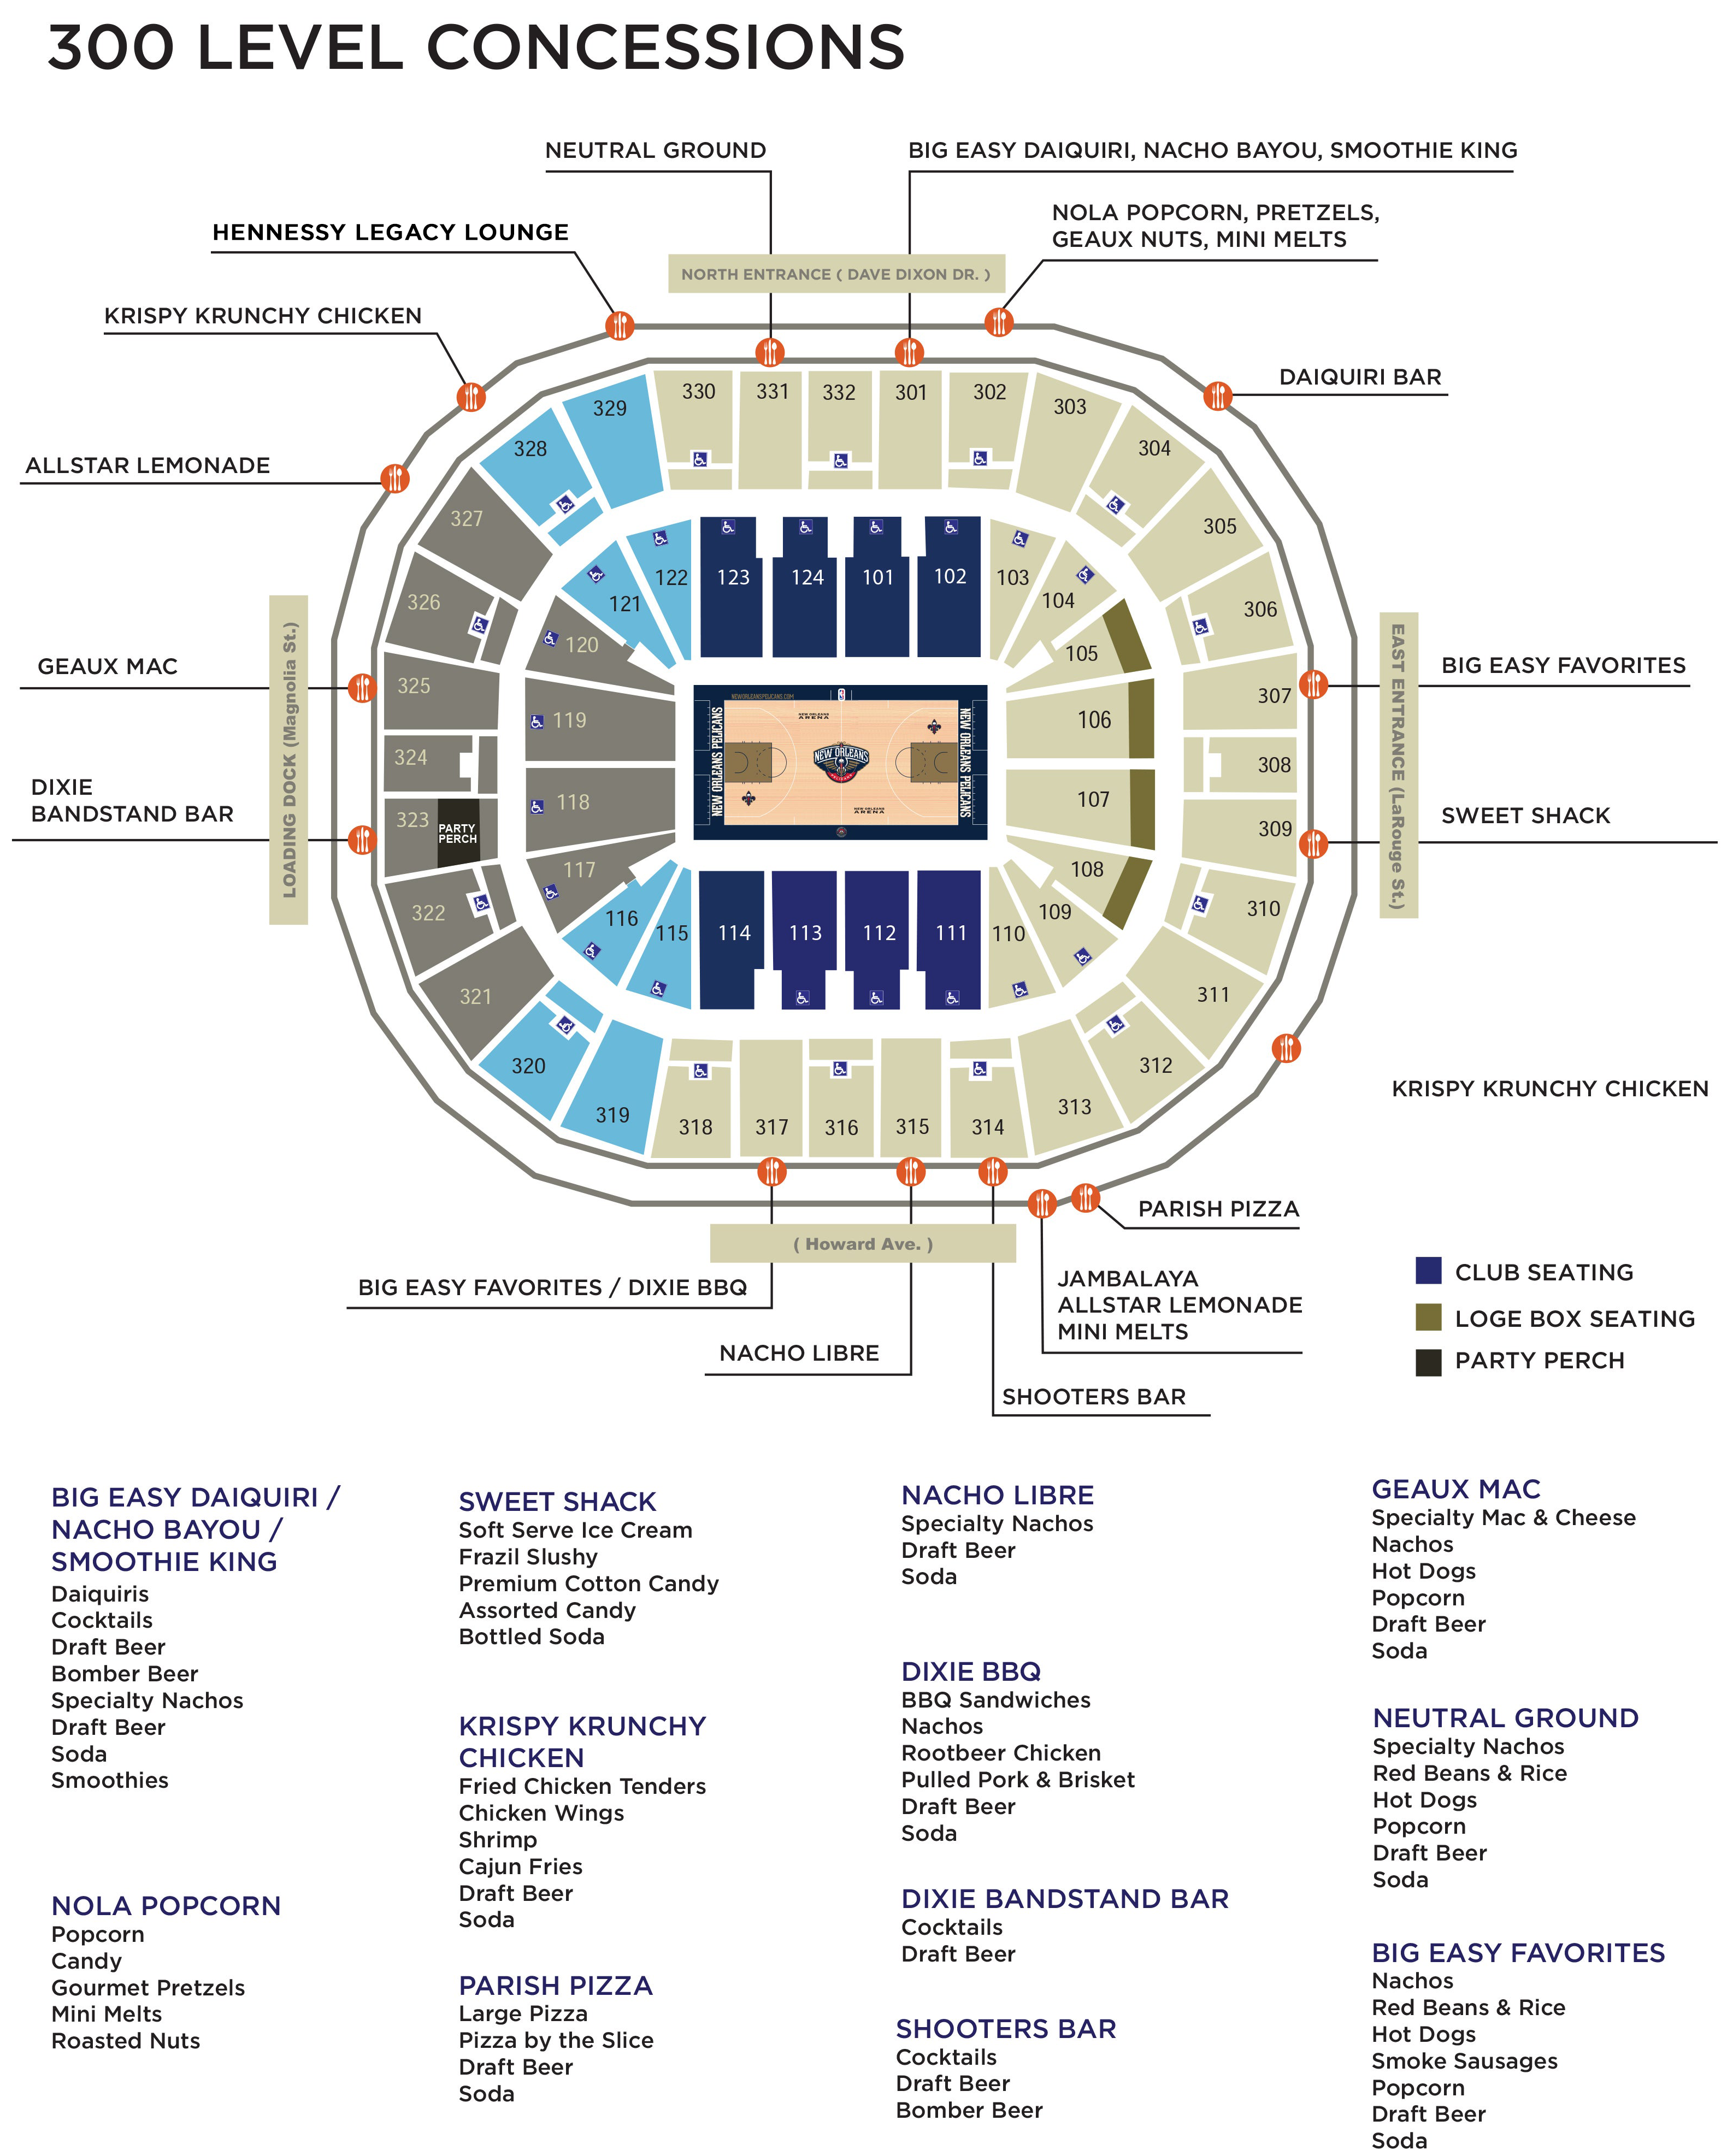 Smoothie King Center, section 103, home of New Orleans Pelicans